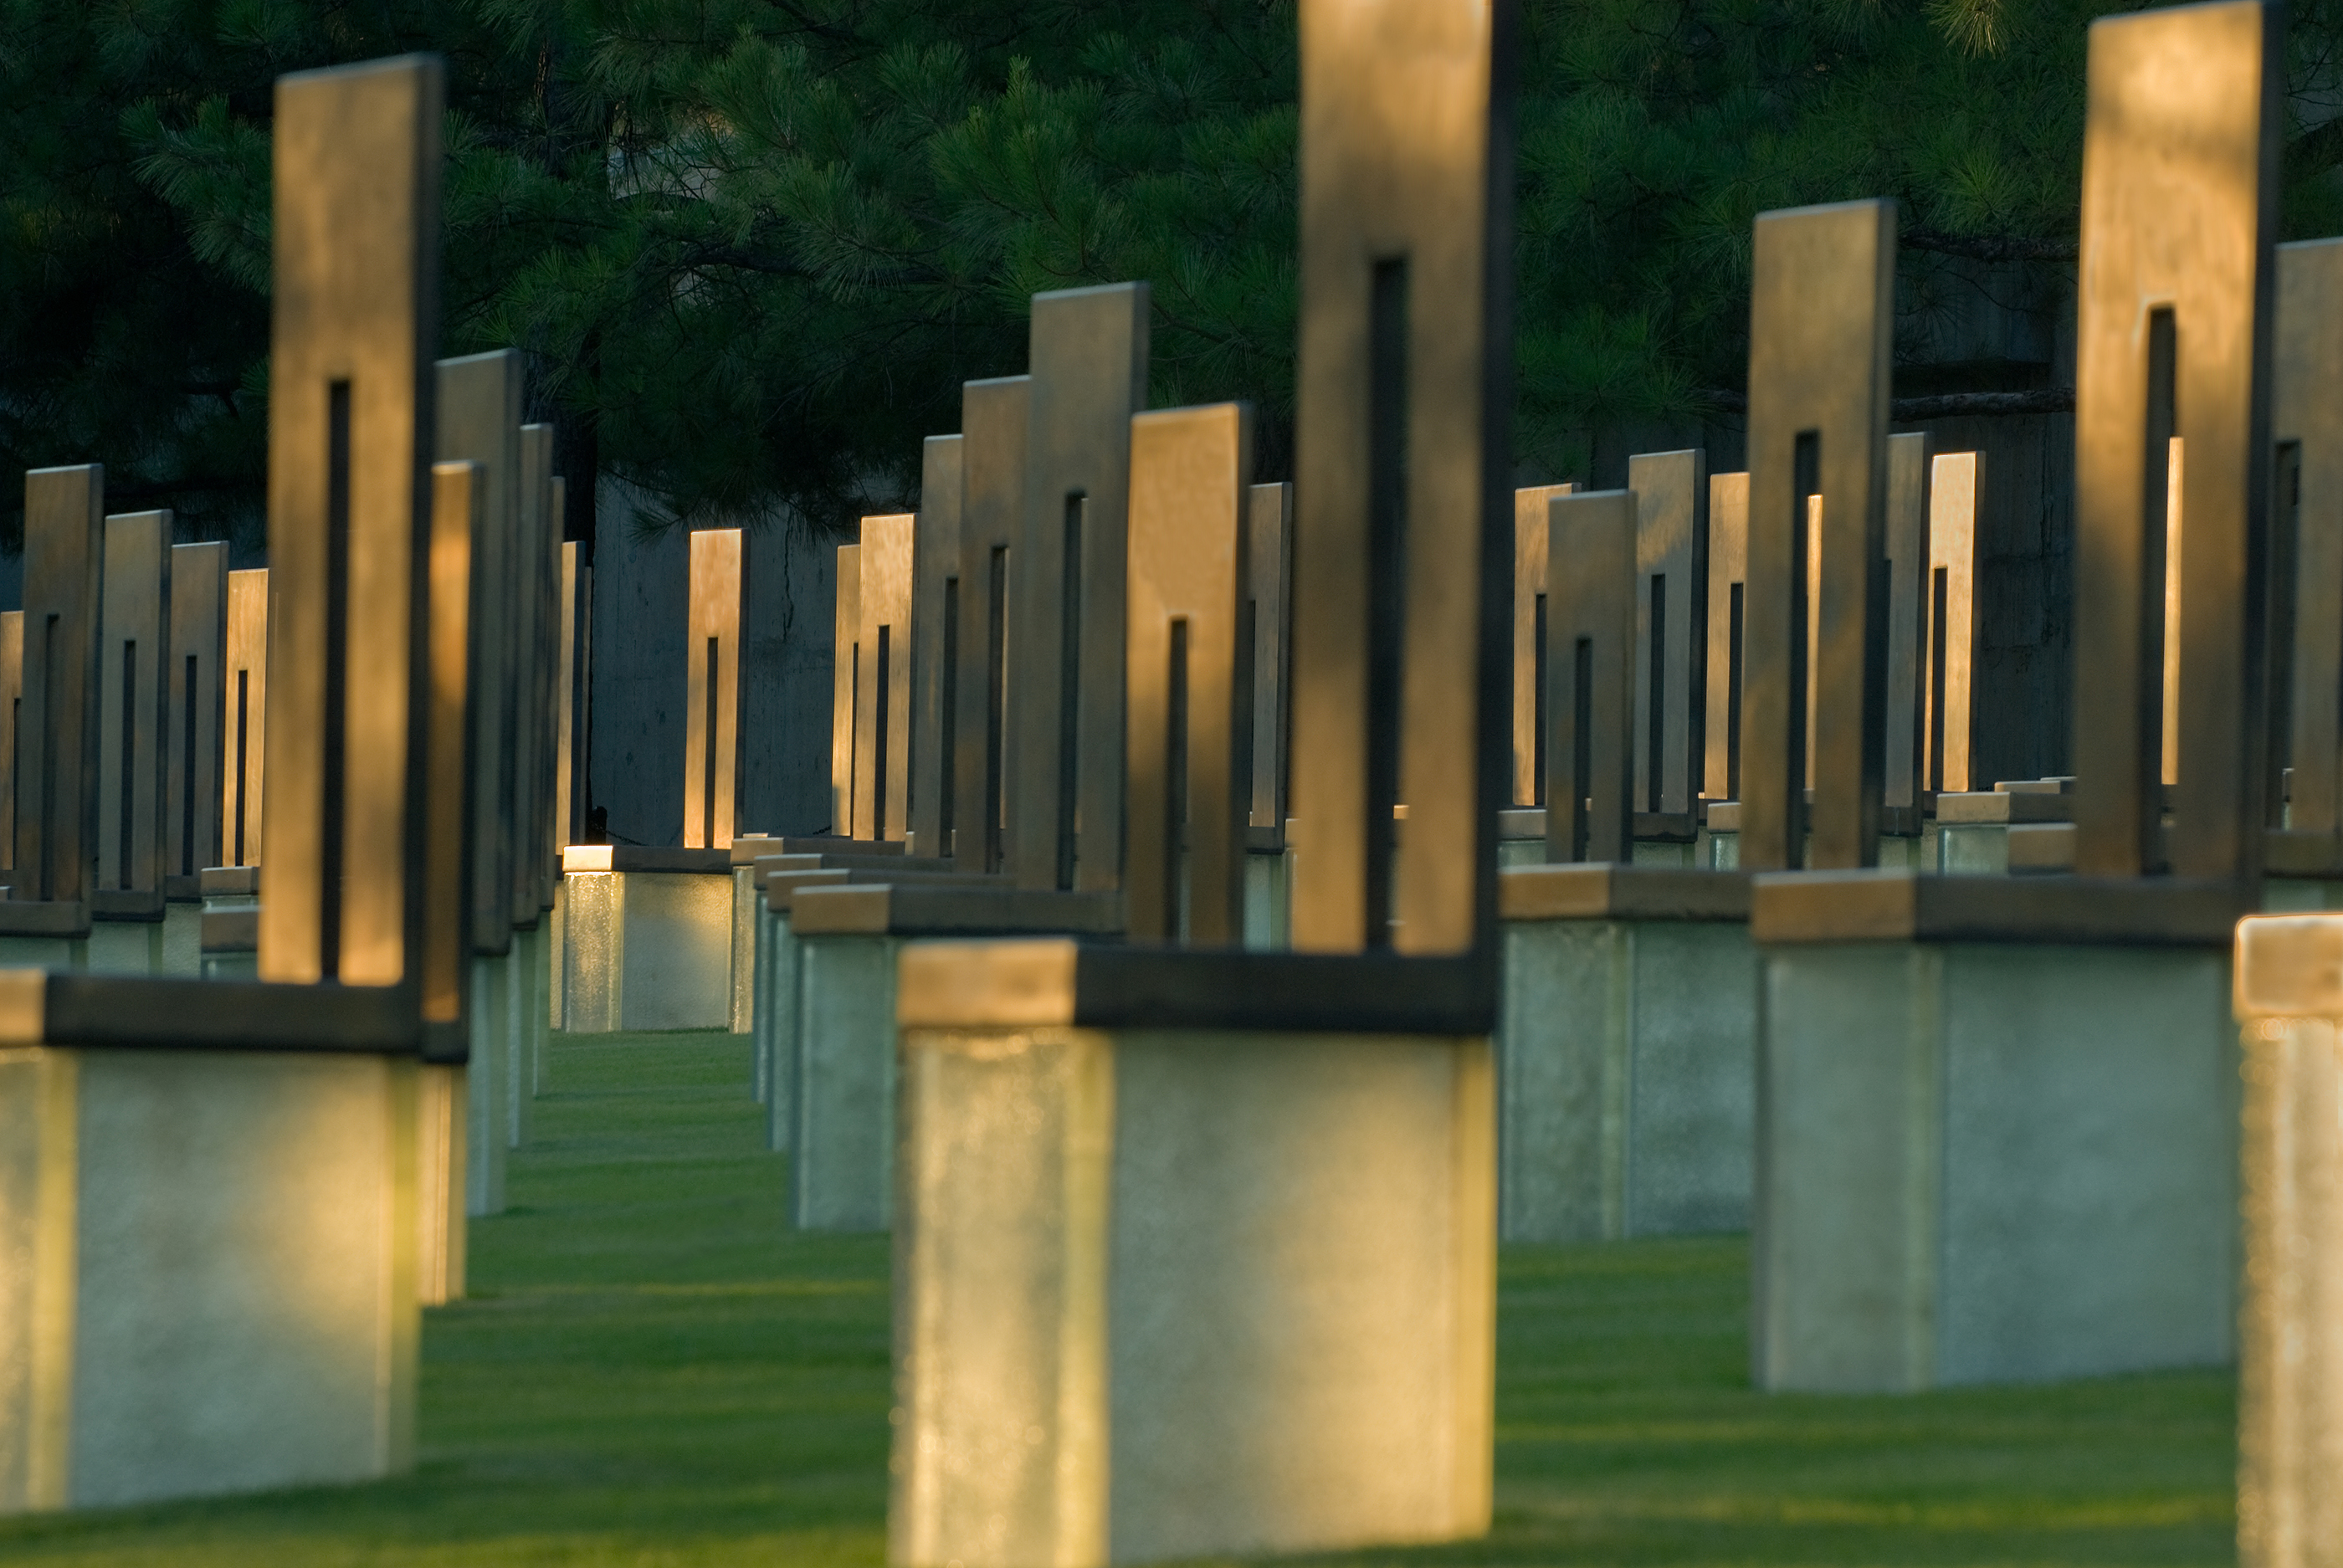 Sculptures of empty chairs fill a grassy field at the site of the Oklahoma City National Memorial and Museum. Sunlight passes through the chairs.